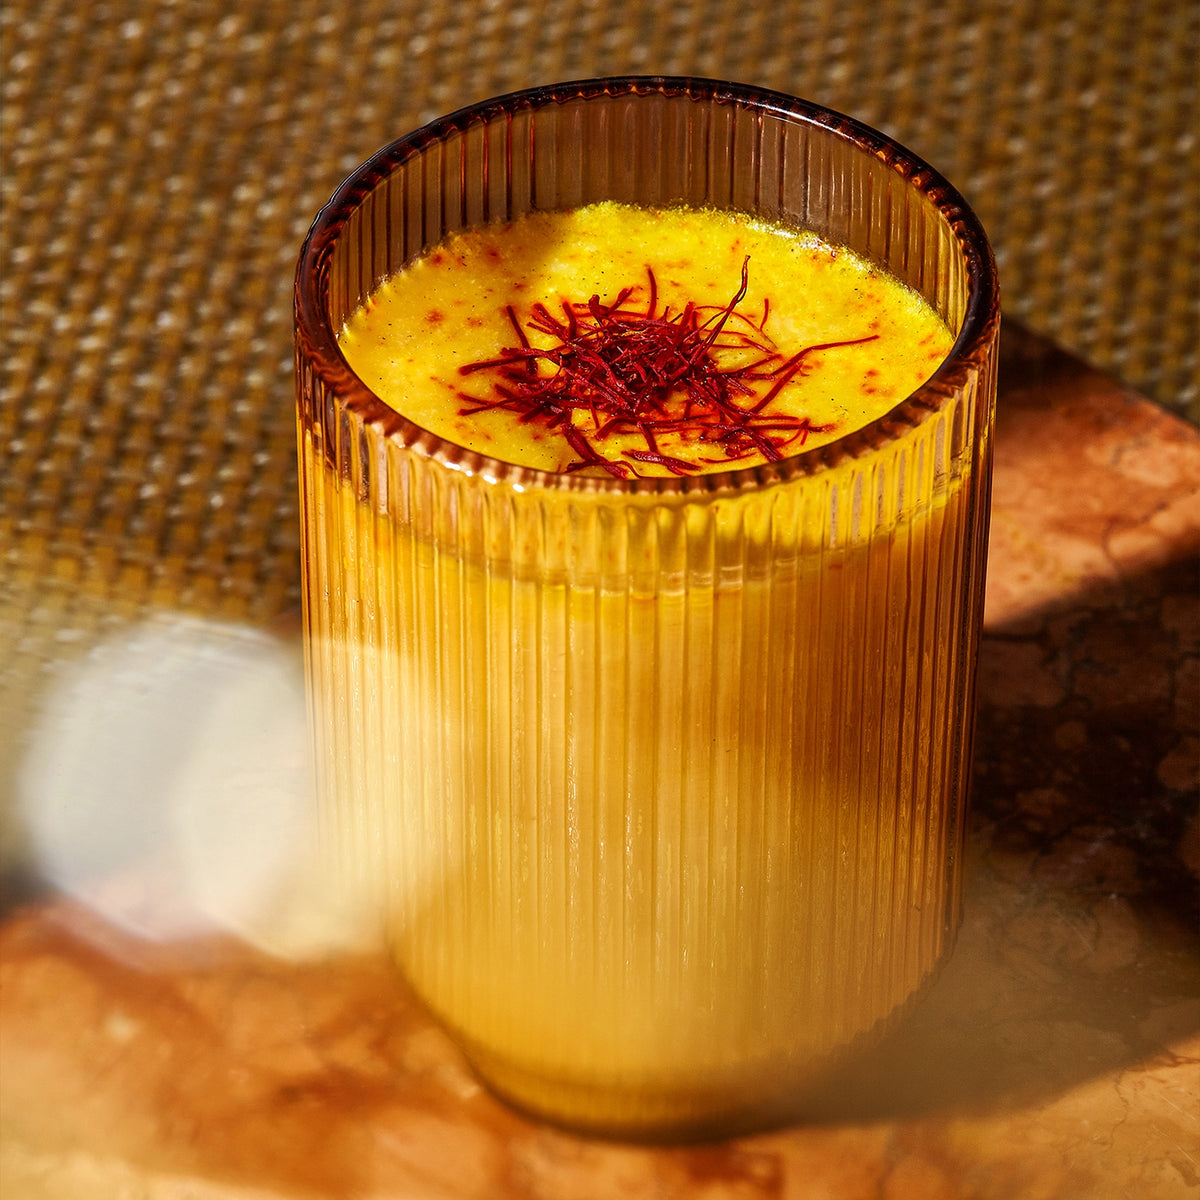 Golden Happy Habits Bundle garnished with saffron supplements, served in a ribbed glass on a textured surface by THE FULLEST.